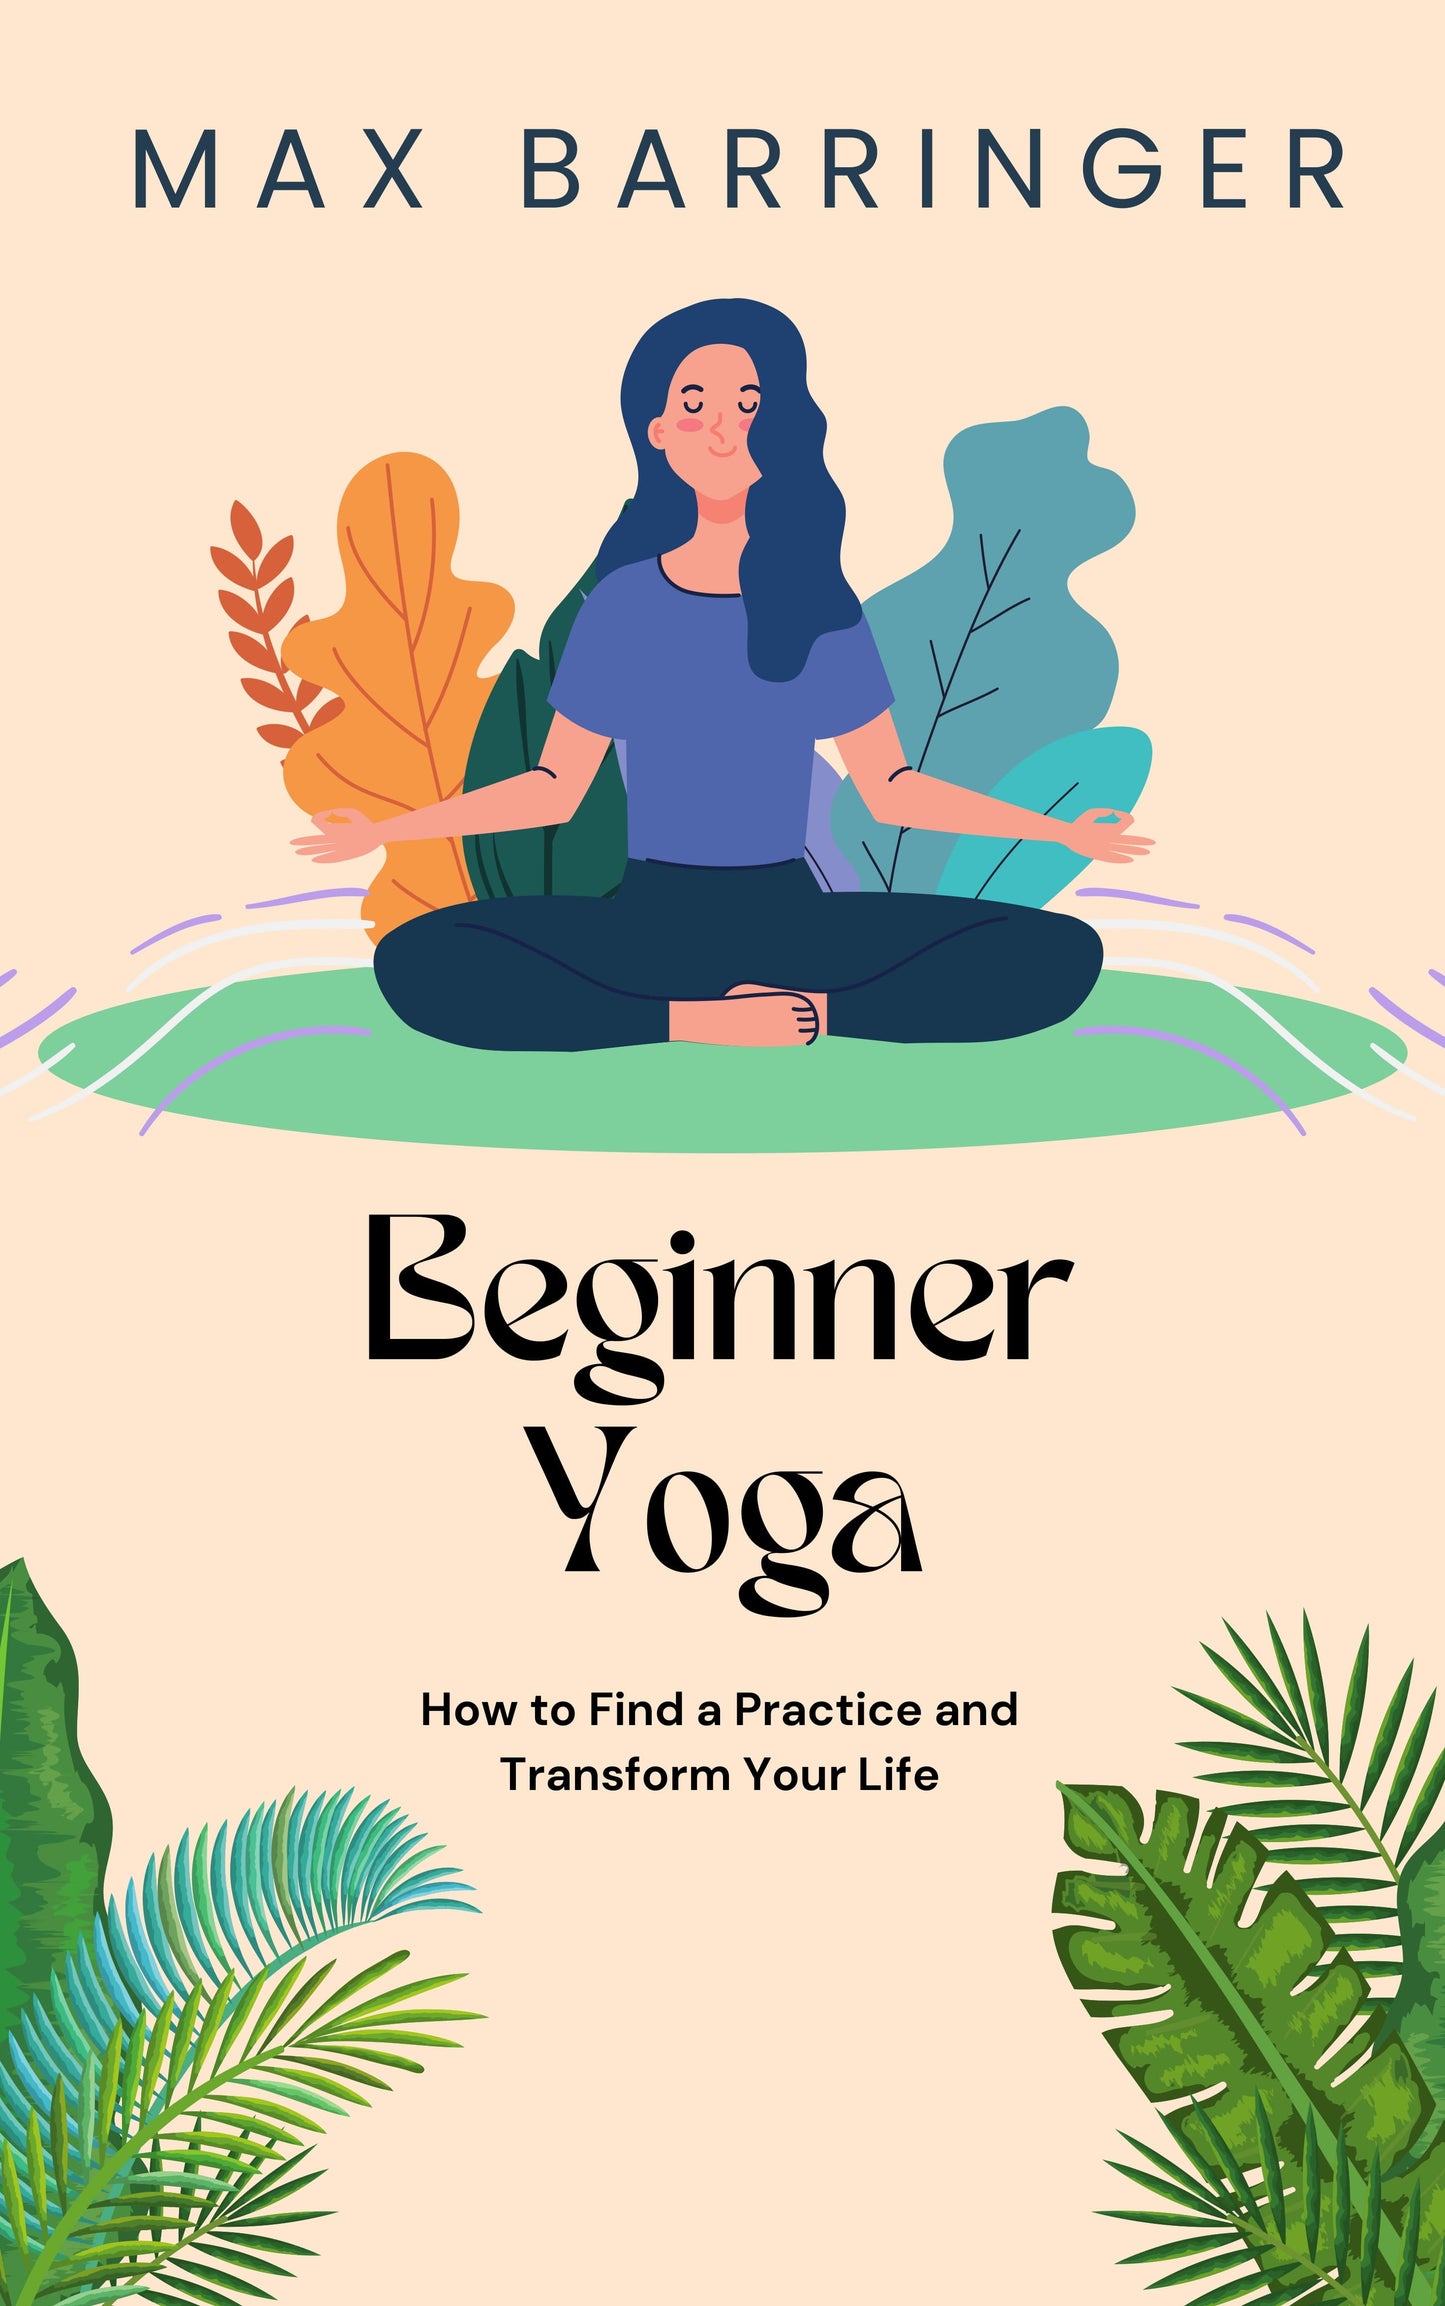 _Gift_Yoga for Beginners Course